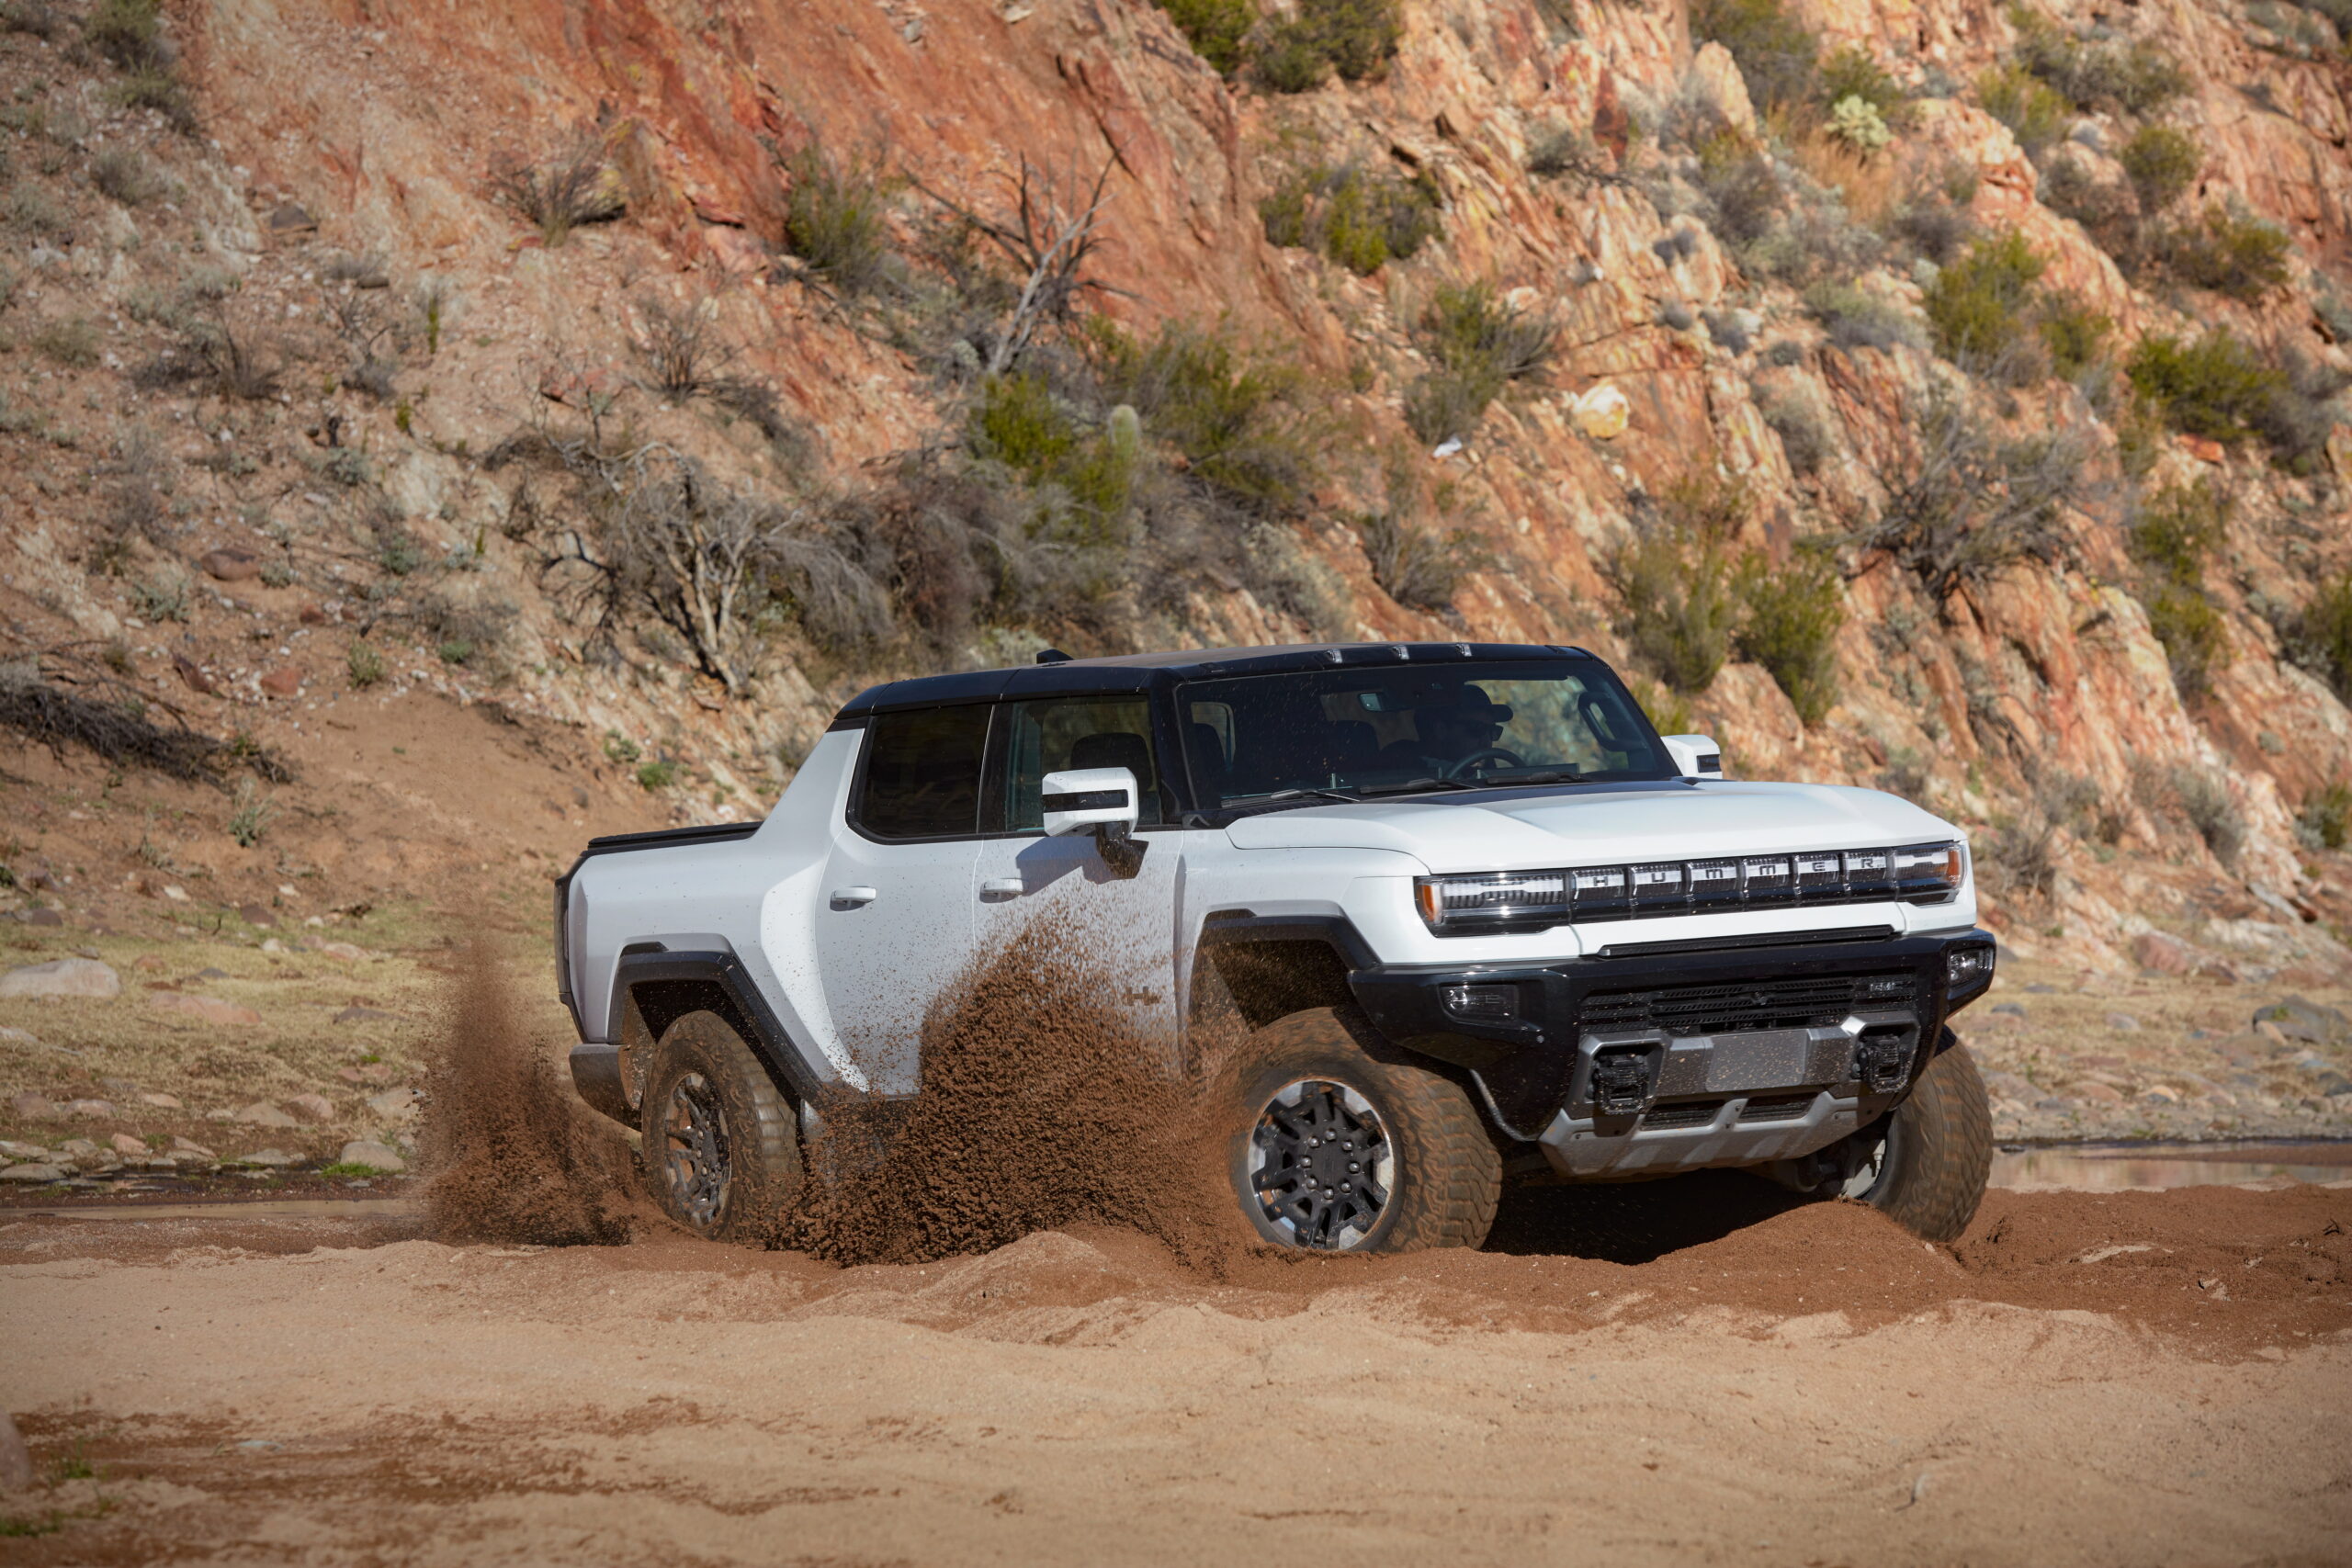 Truck Review: GMC’s Hummer EV Isn't for Hunters, But It Does Showcase the Future of Electric Pickups